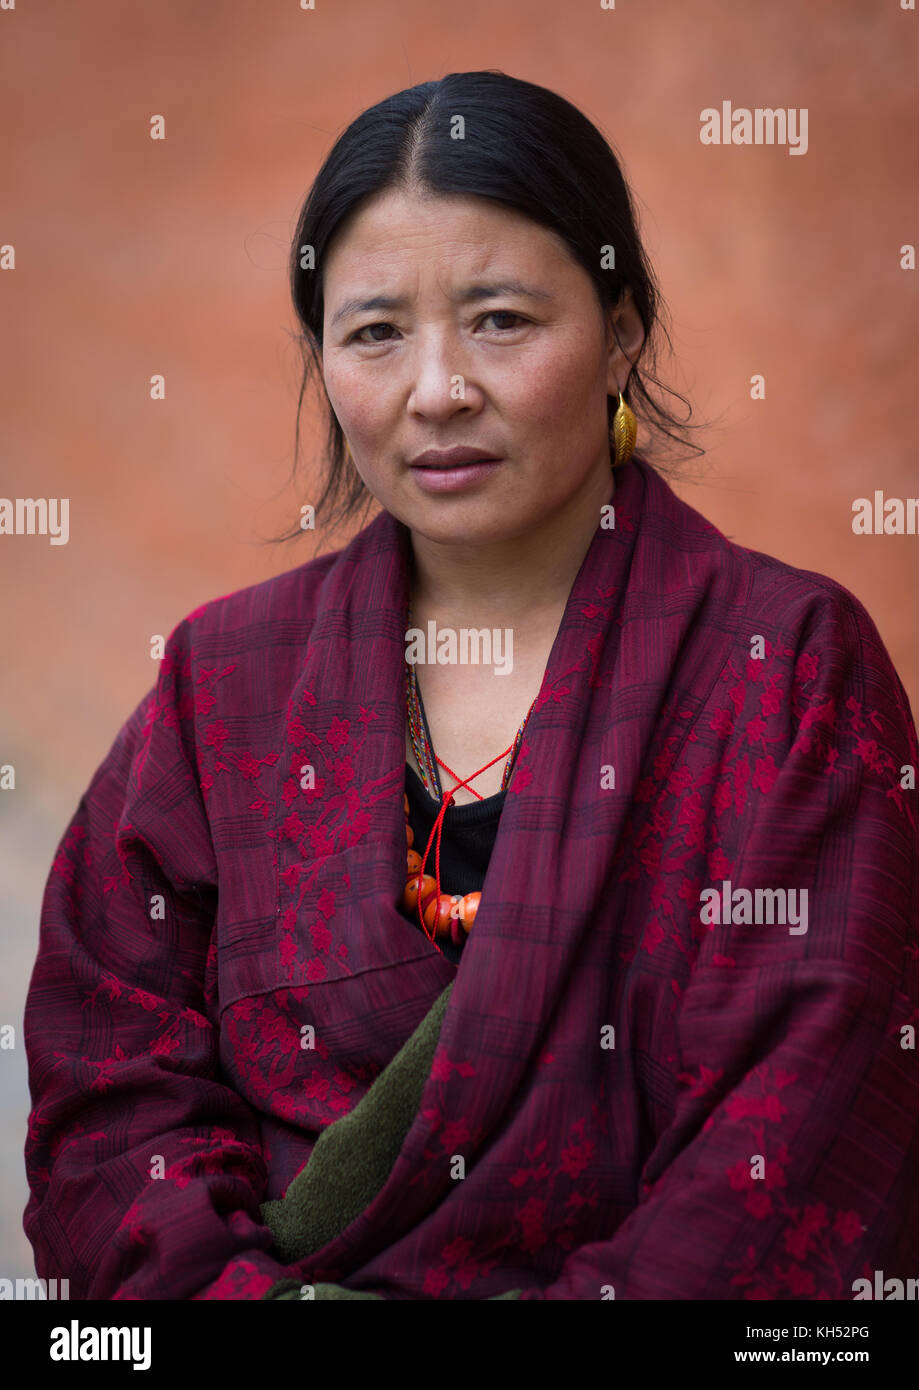 Portrait of a tibetan woman during a pilgrimage in Labrang monastery, Gansu province, Labrang, China Stock Photo